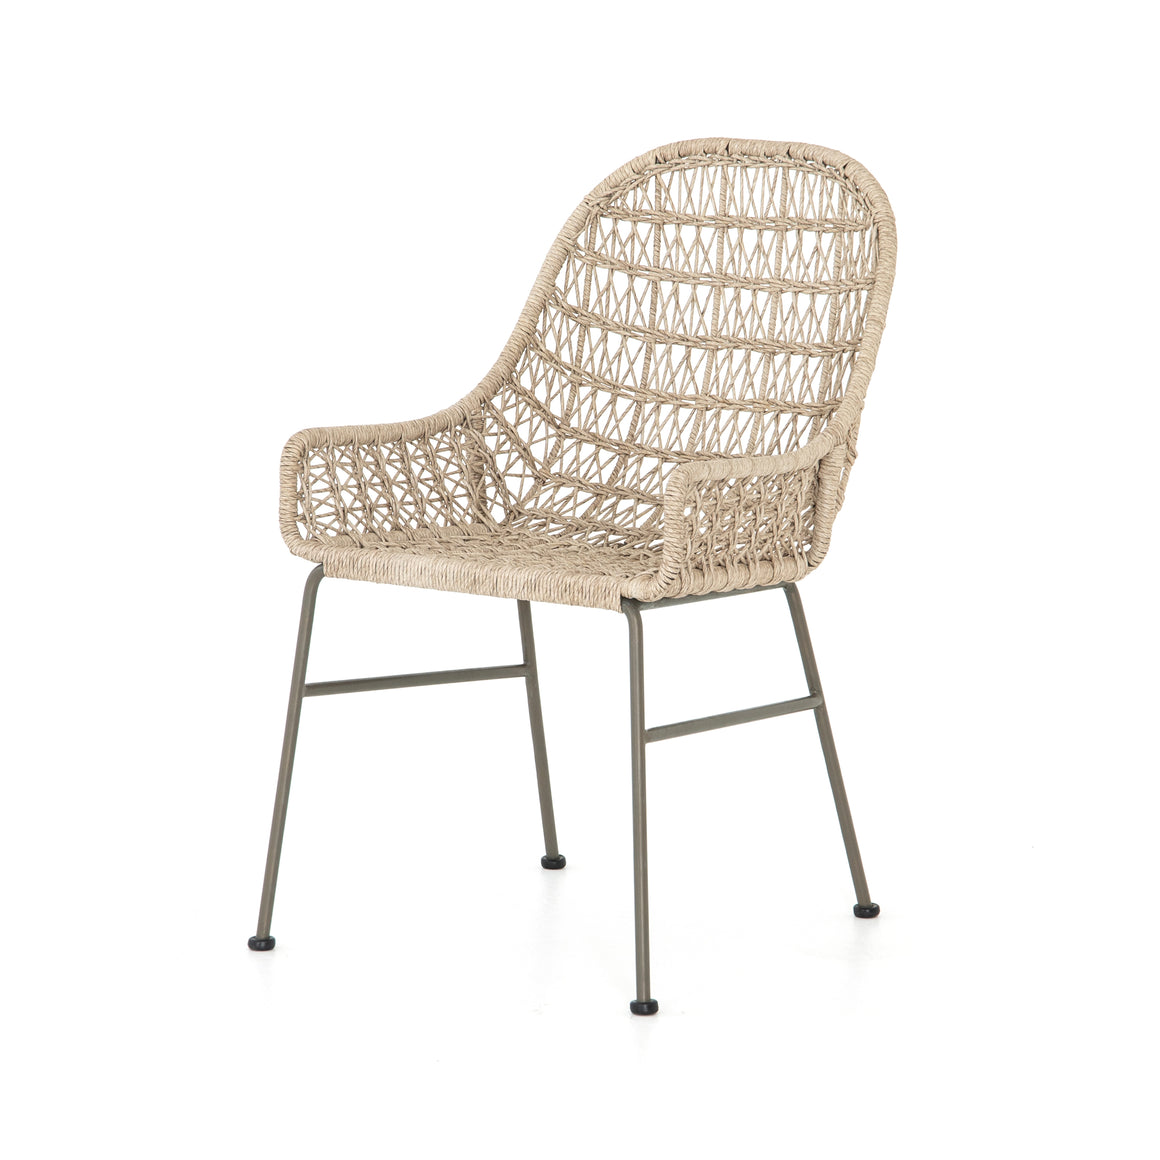 Bandera Outdoor Dining Chair - Vintage White